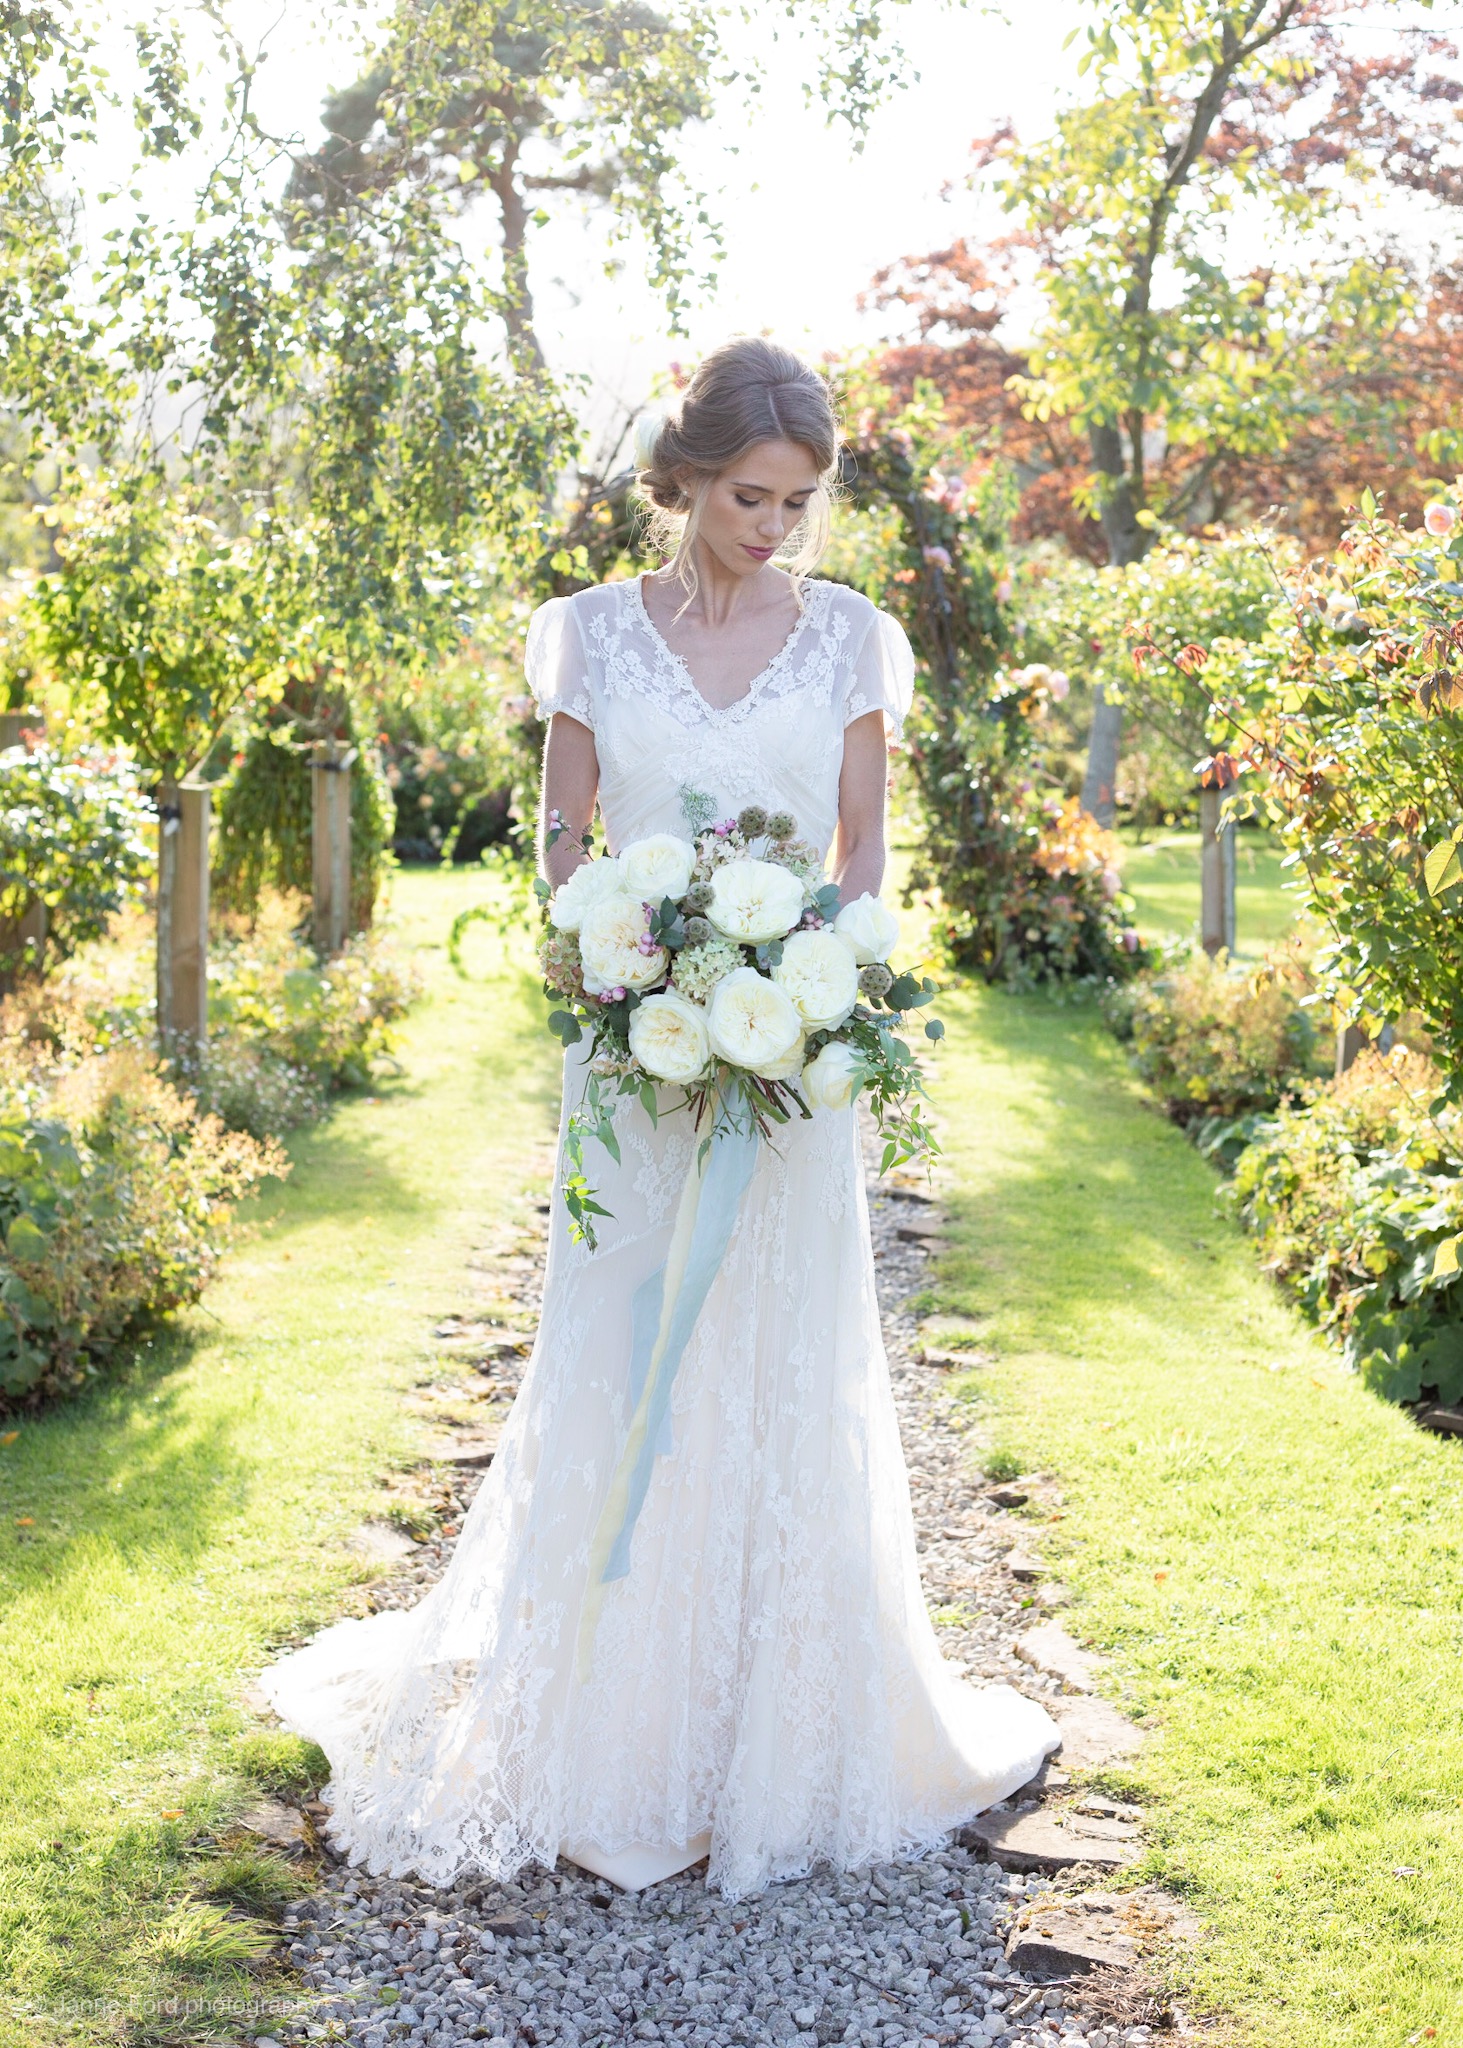 An English Country Wedding - janneford.com